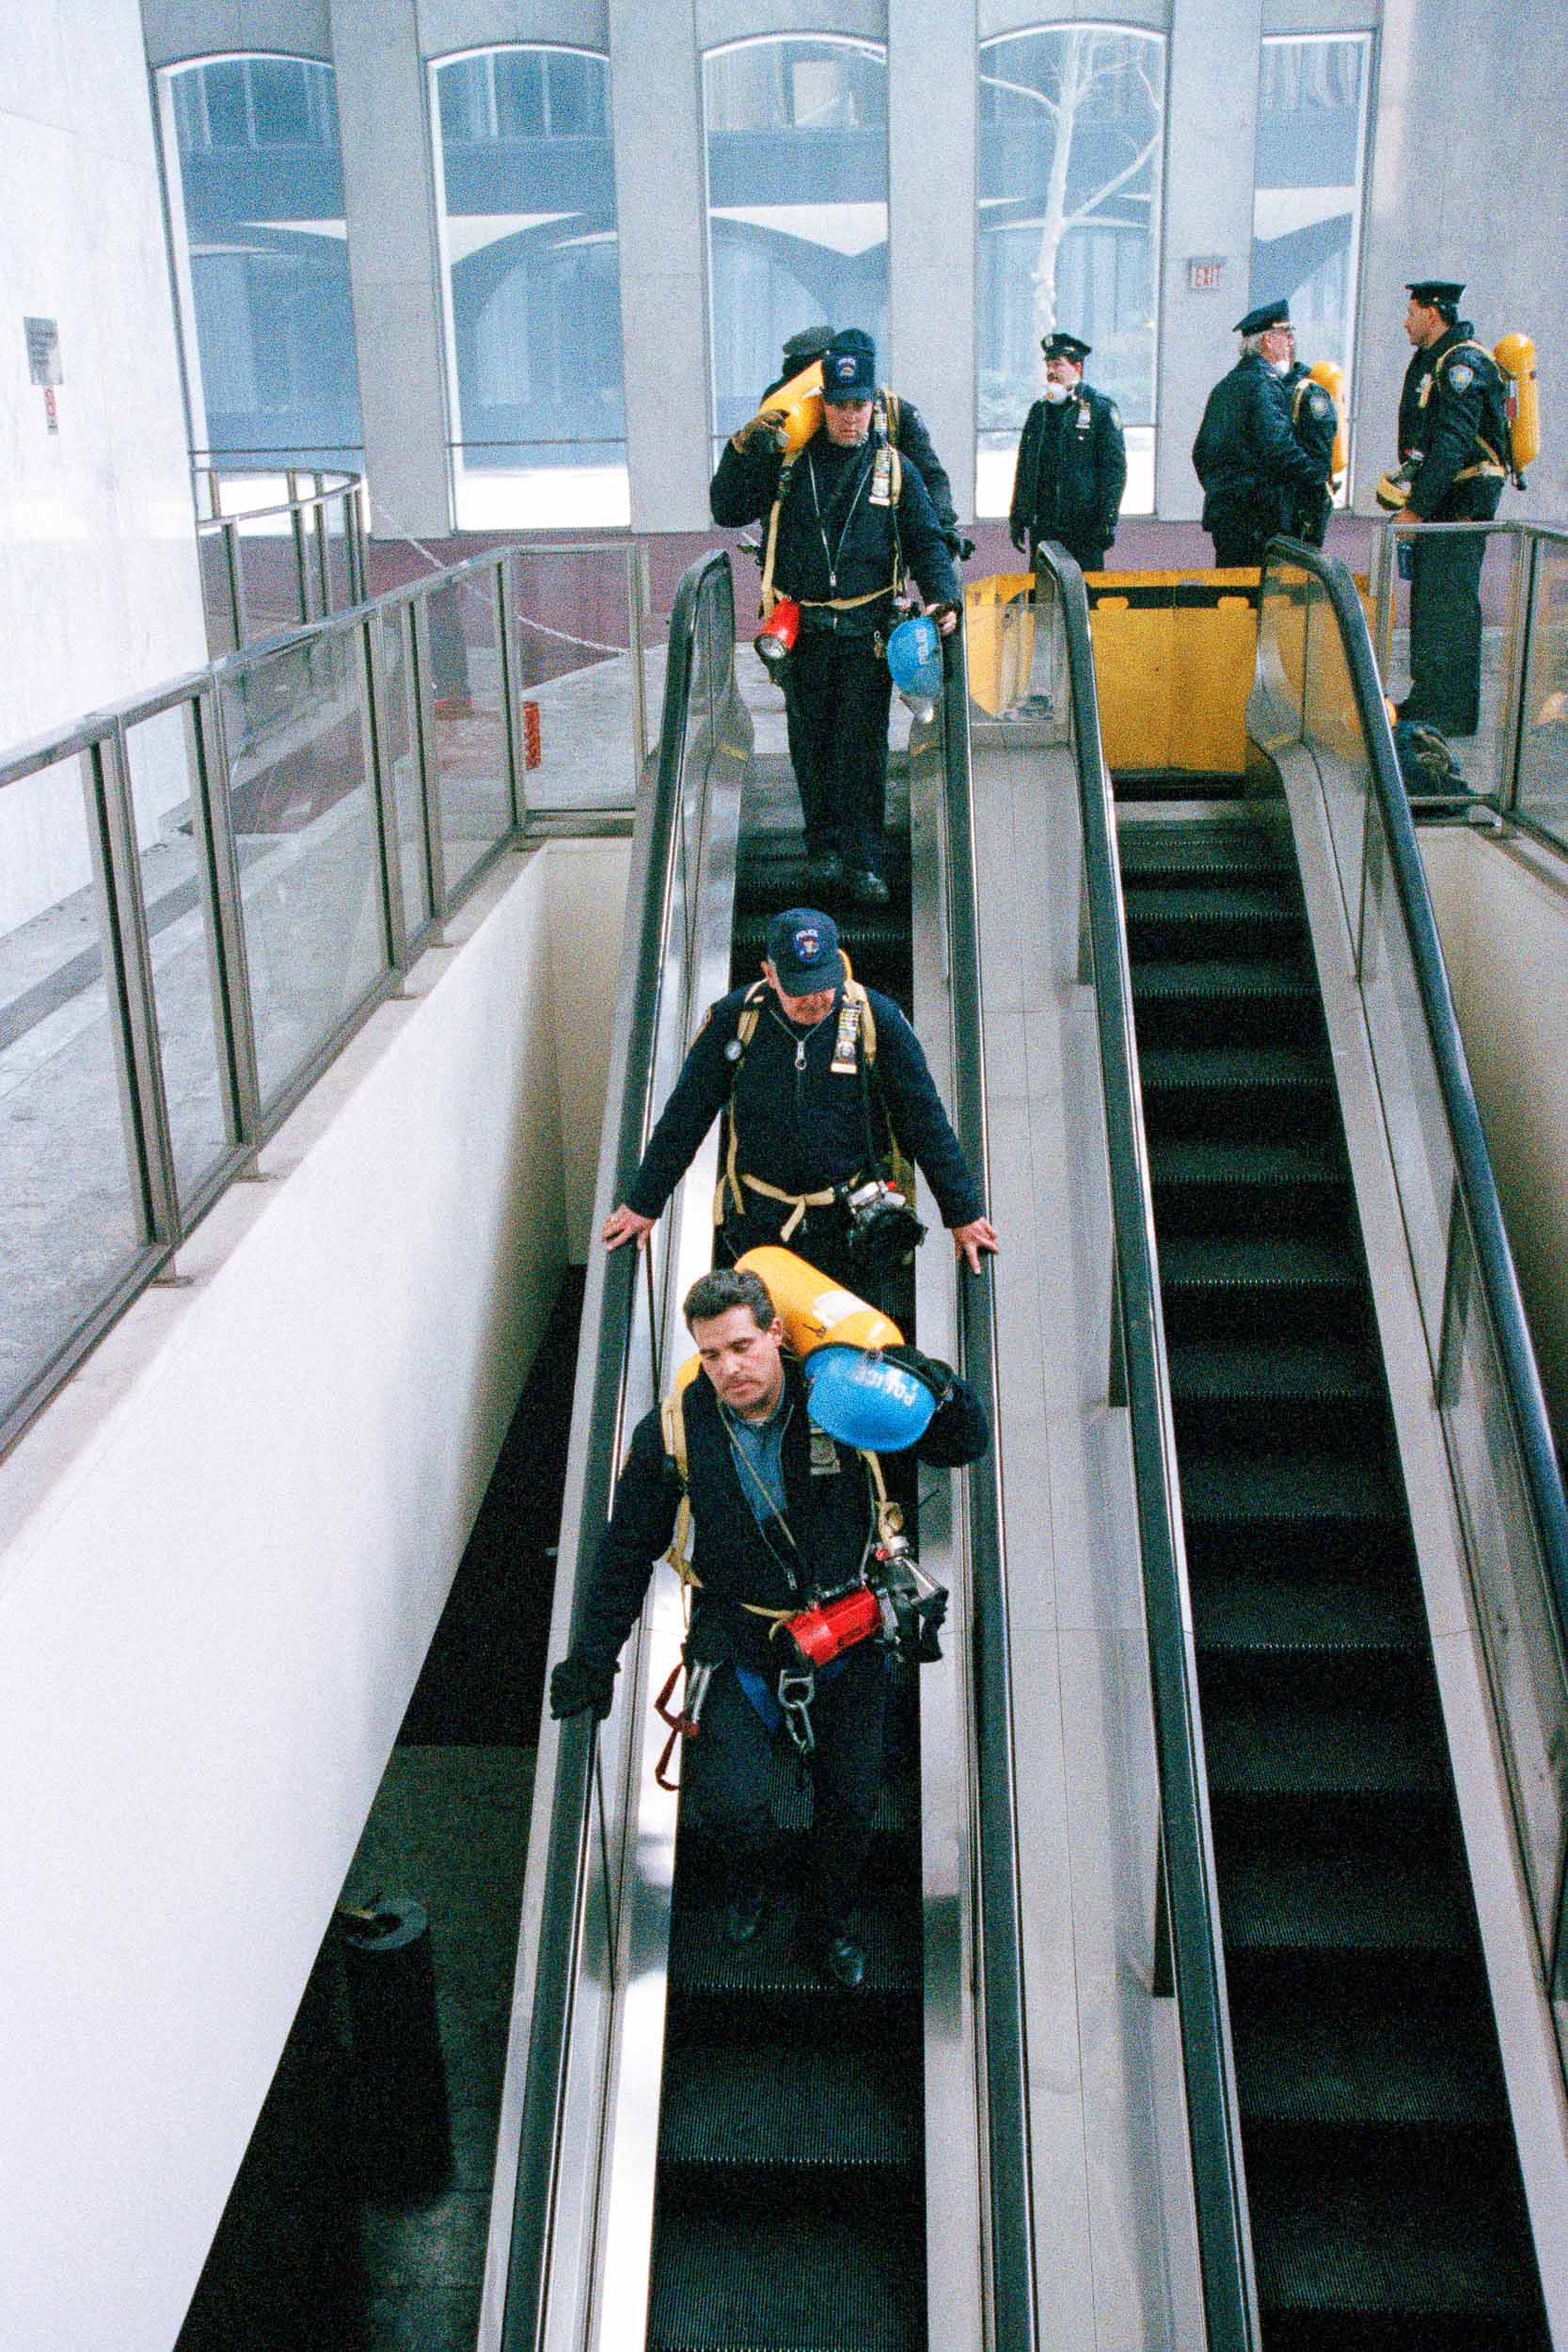 Firemen carrying oxygen tanks descend an escalator to the lower  lobby of the World Trade Center, NY, 1993